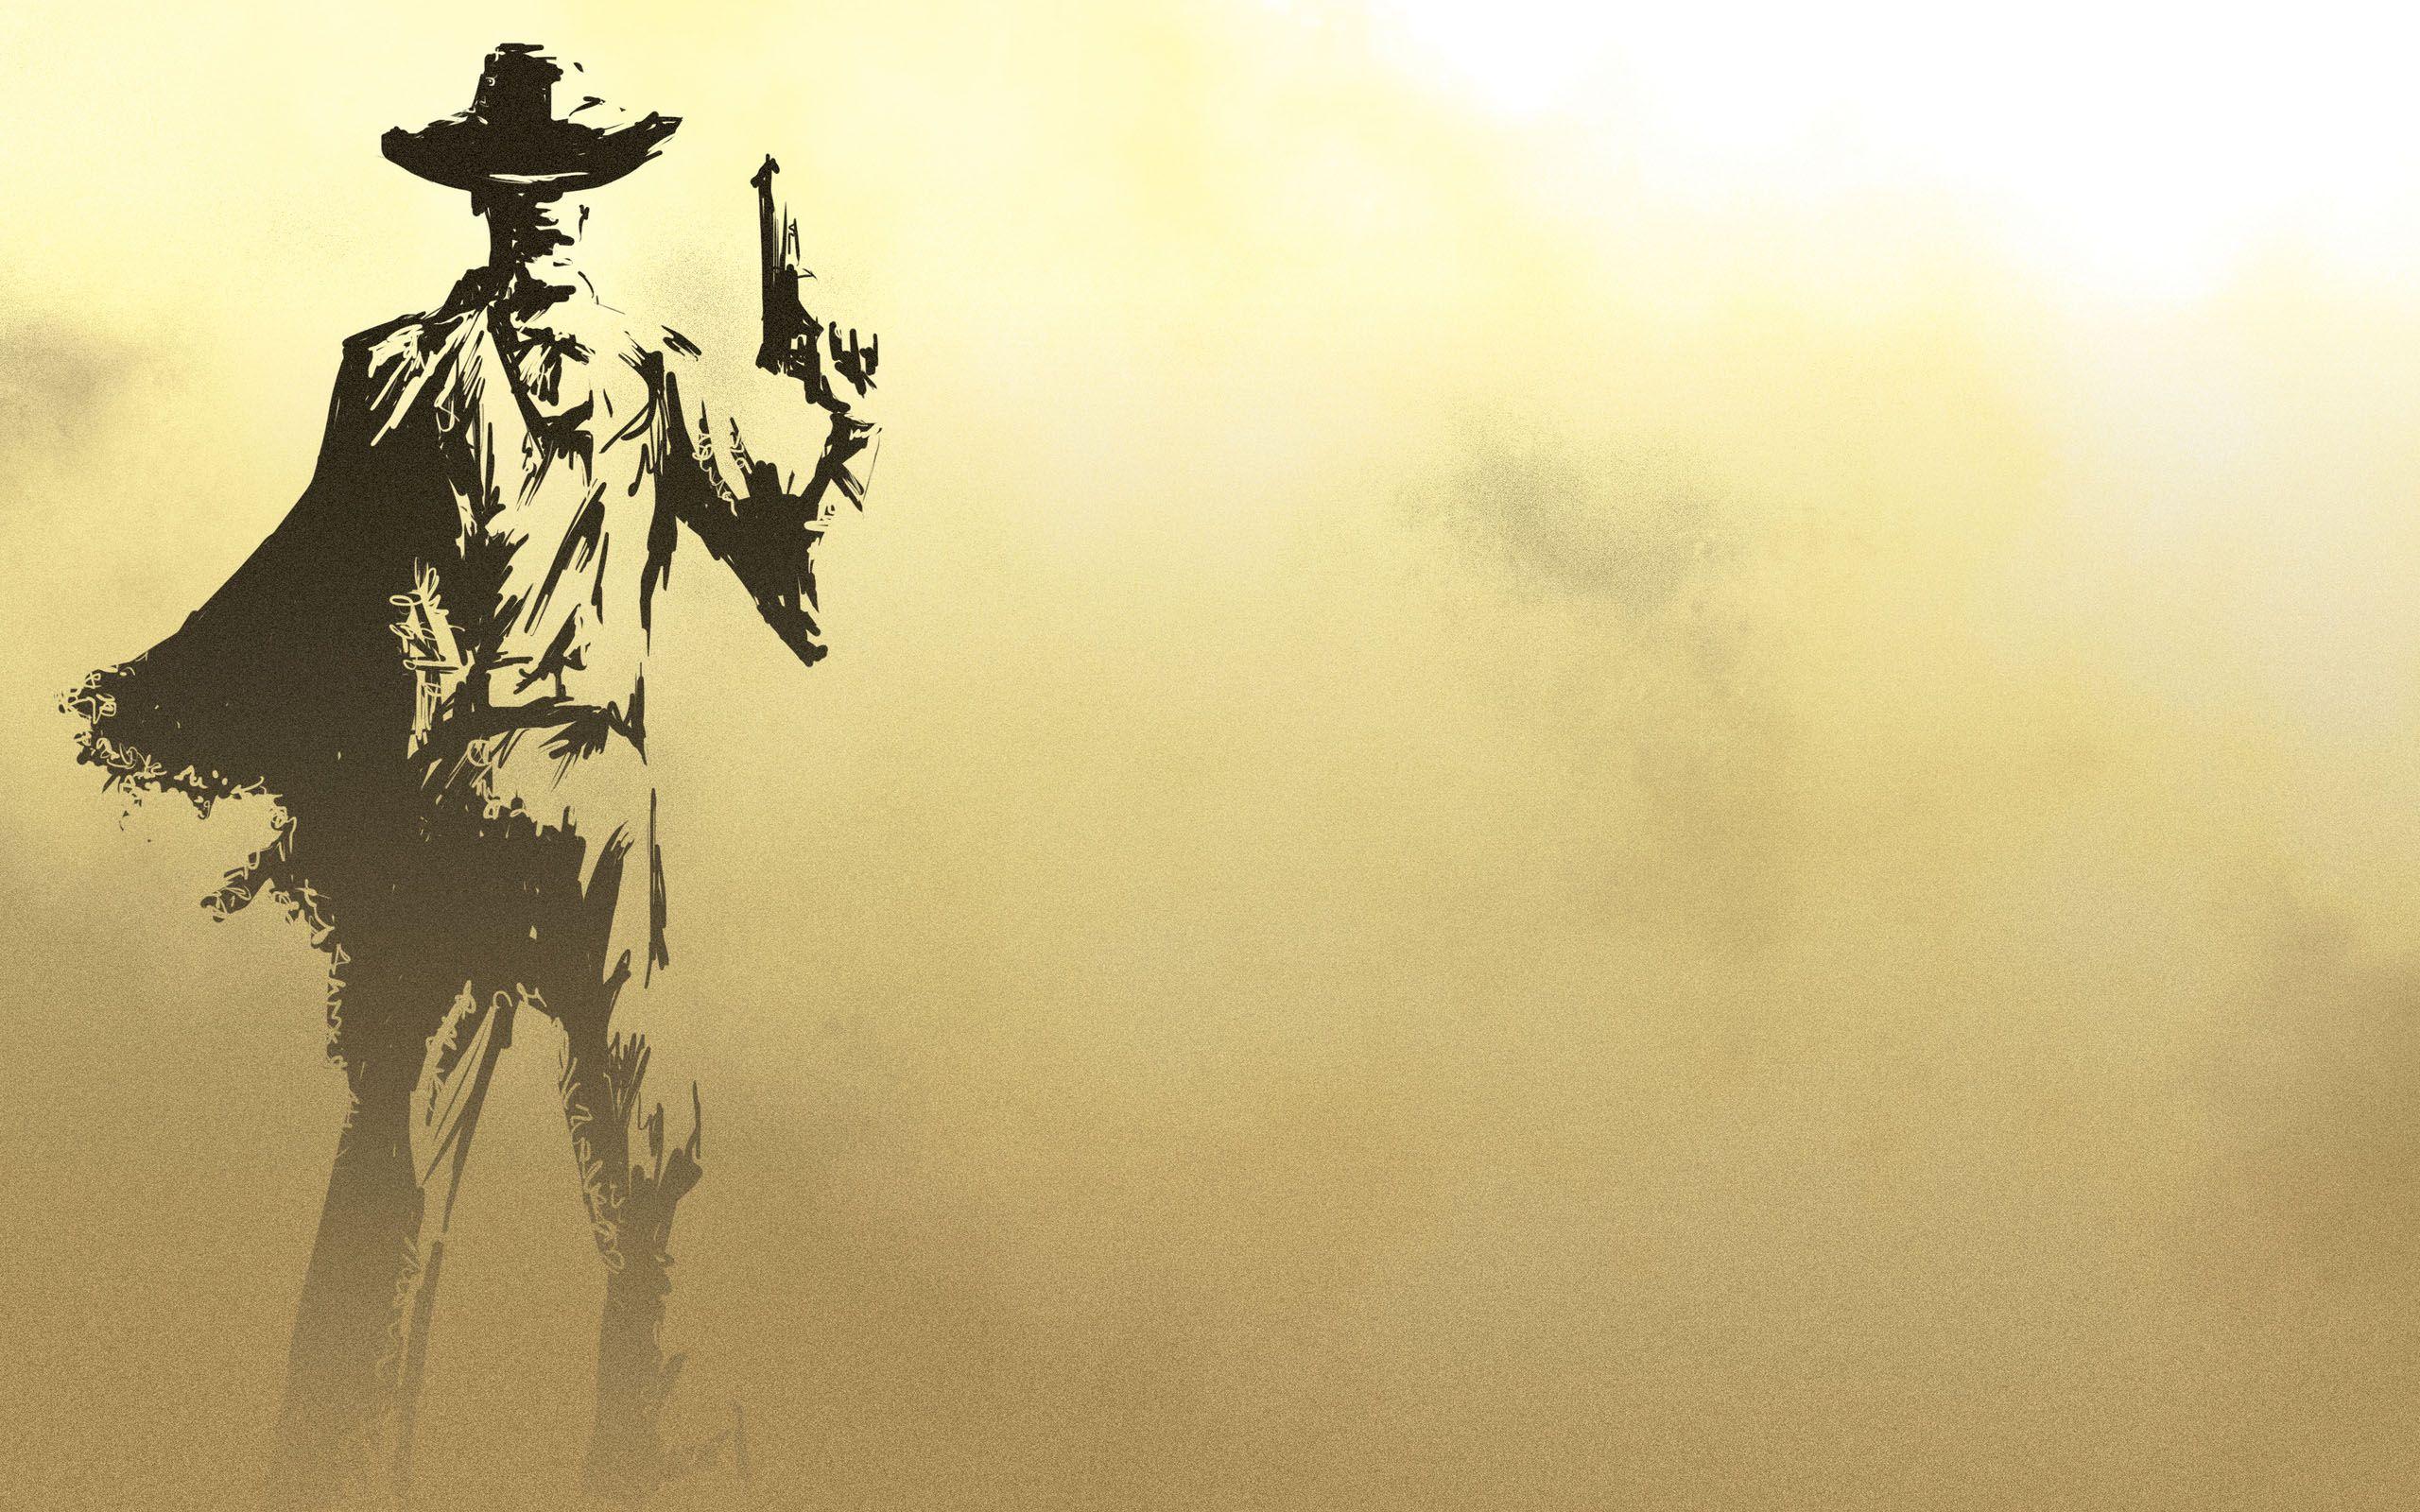 HD Cowboy Wallpaper and Photo. View HDQ Cover Wallpaper